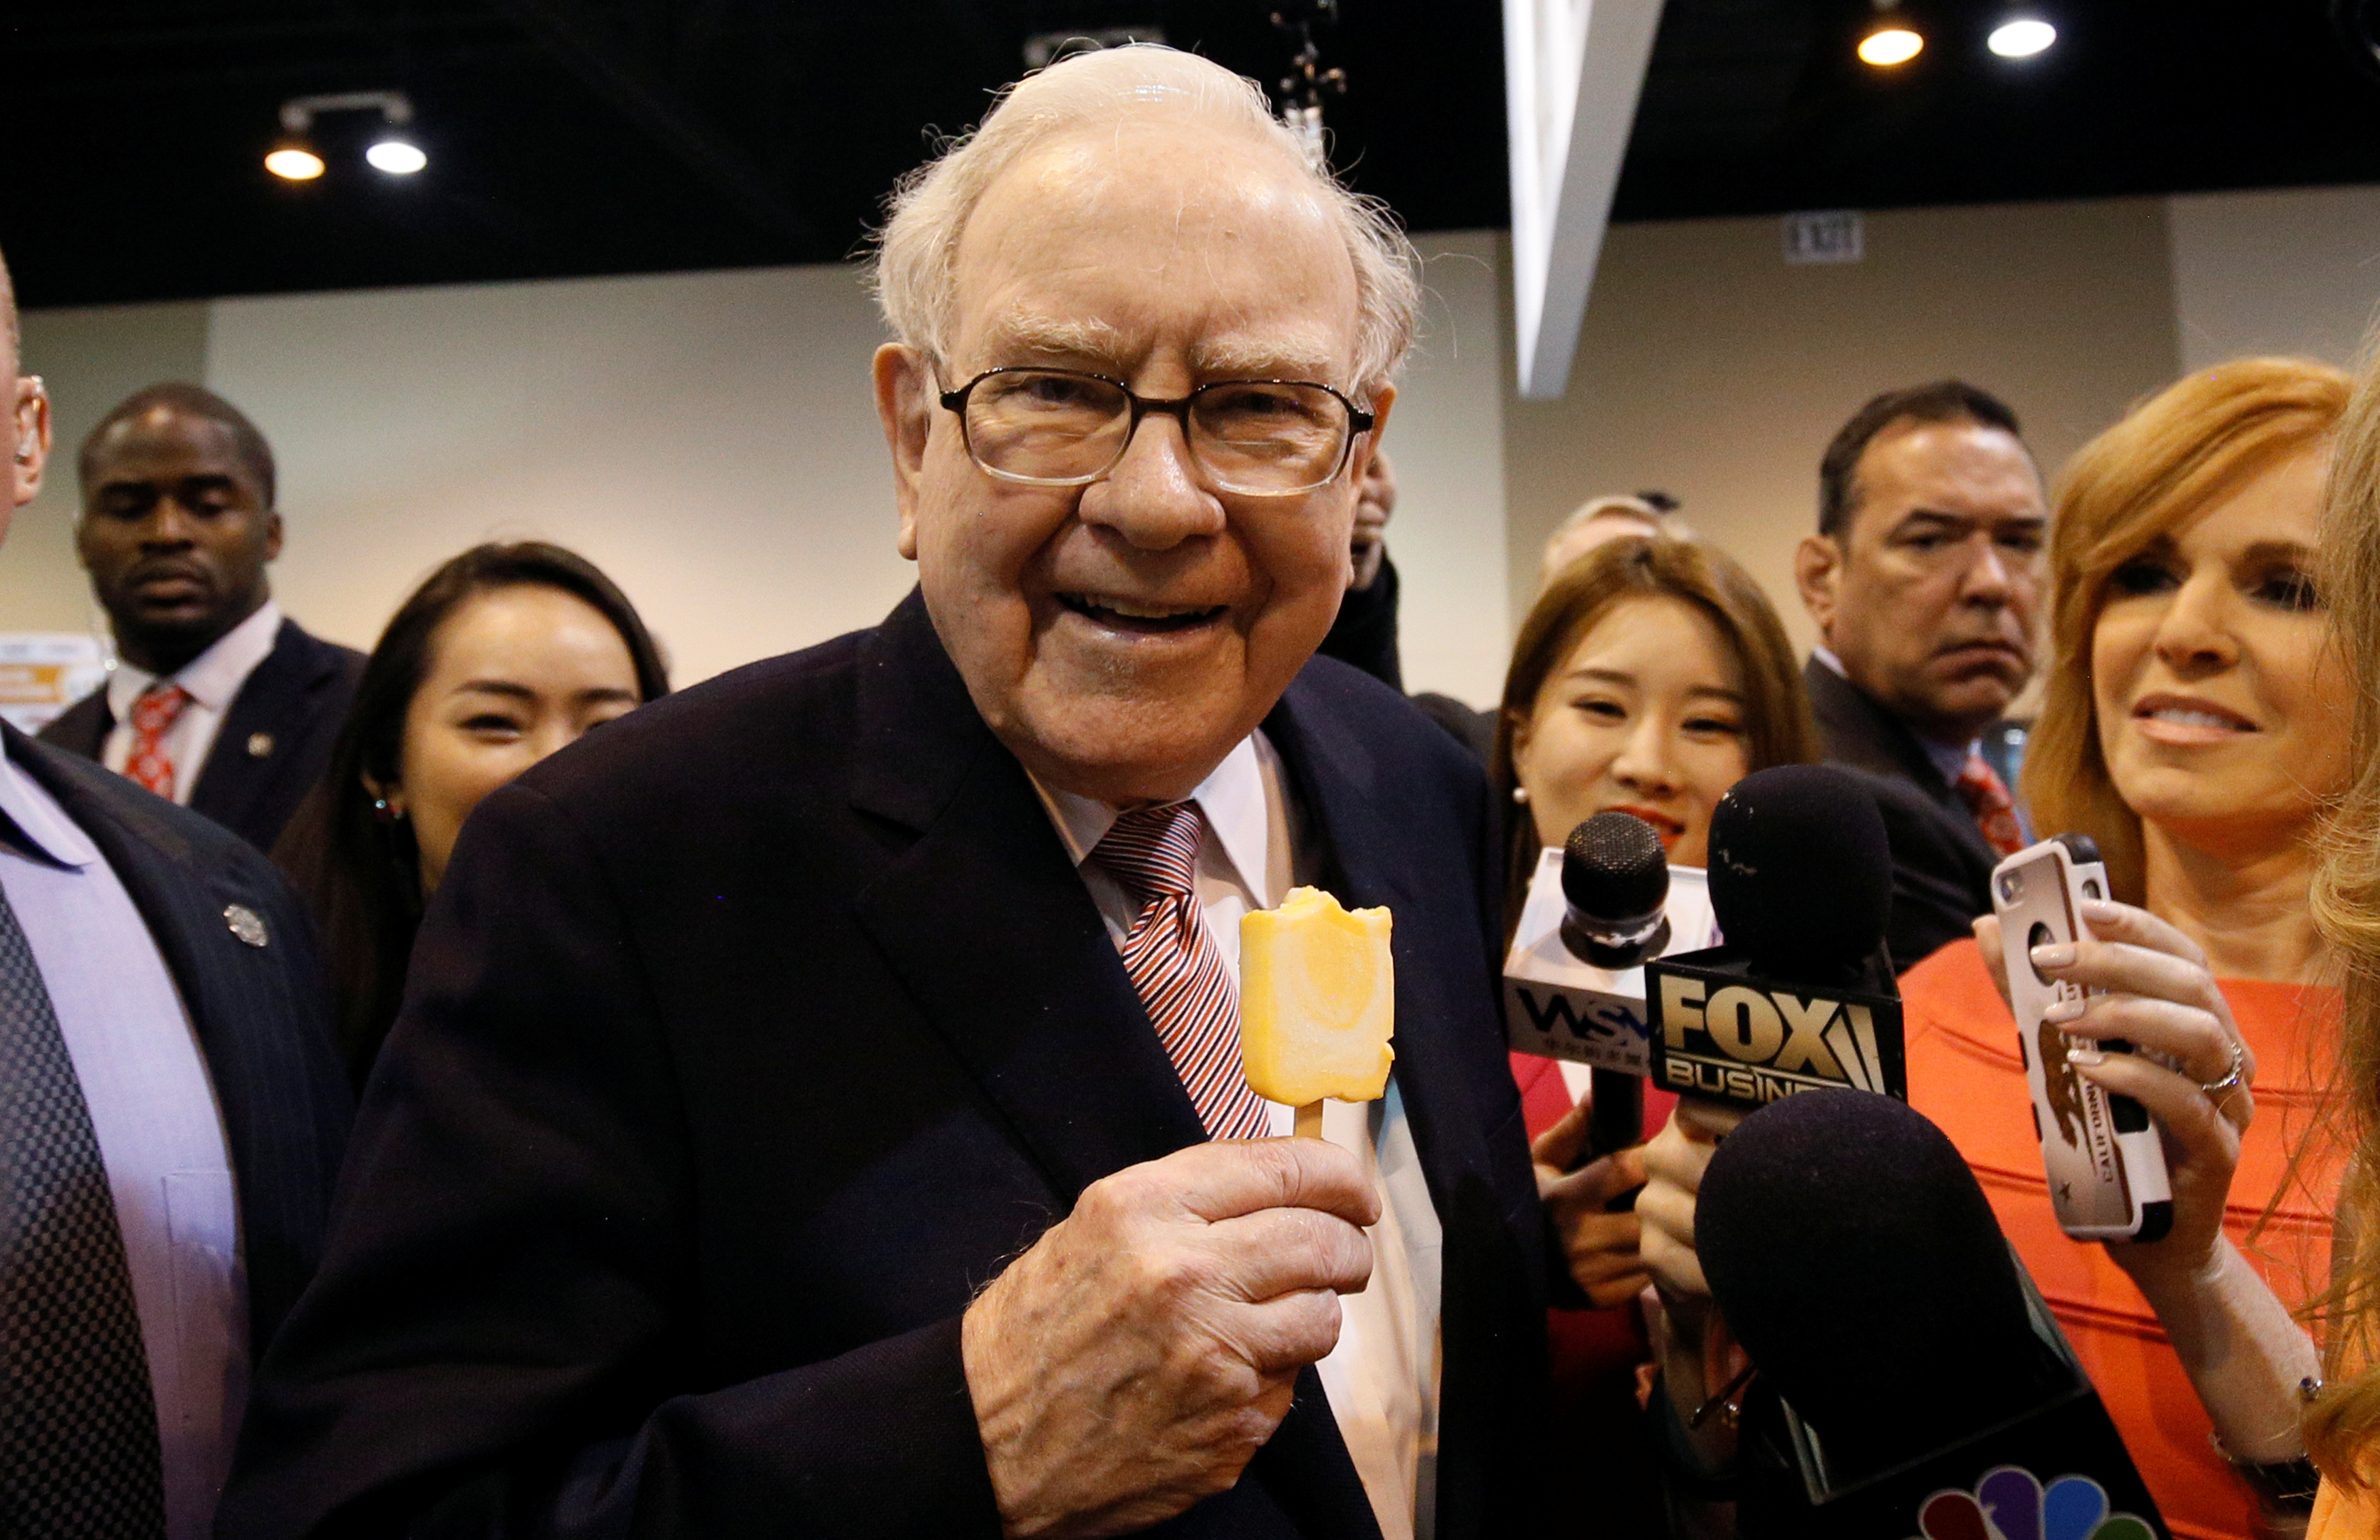 Berkshire Hathaway chairman and CEO Warren Buffett enjoys an ice cream treat from Dairy Queen before the Berkshire's annual meeting in Omaha